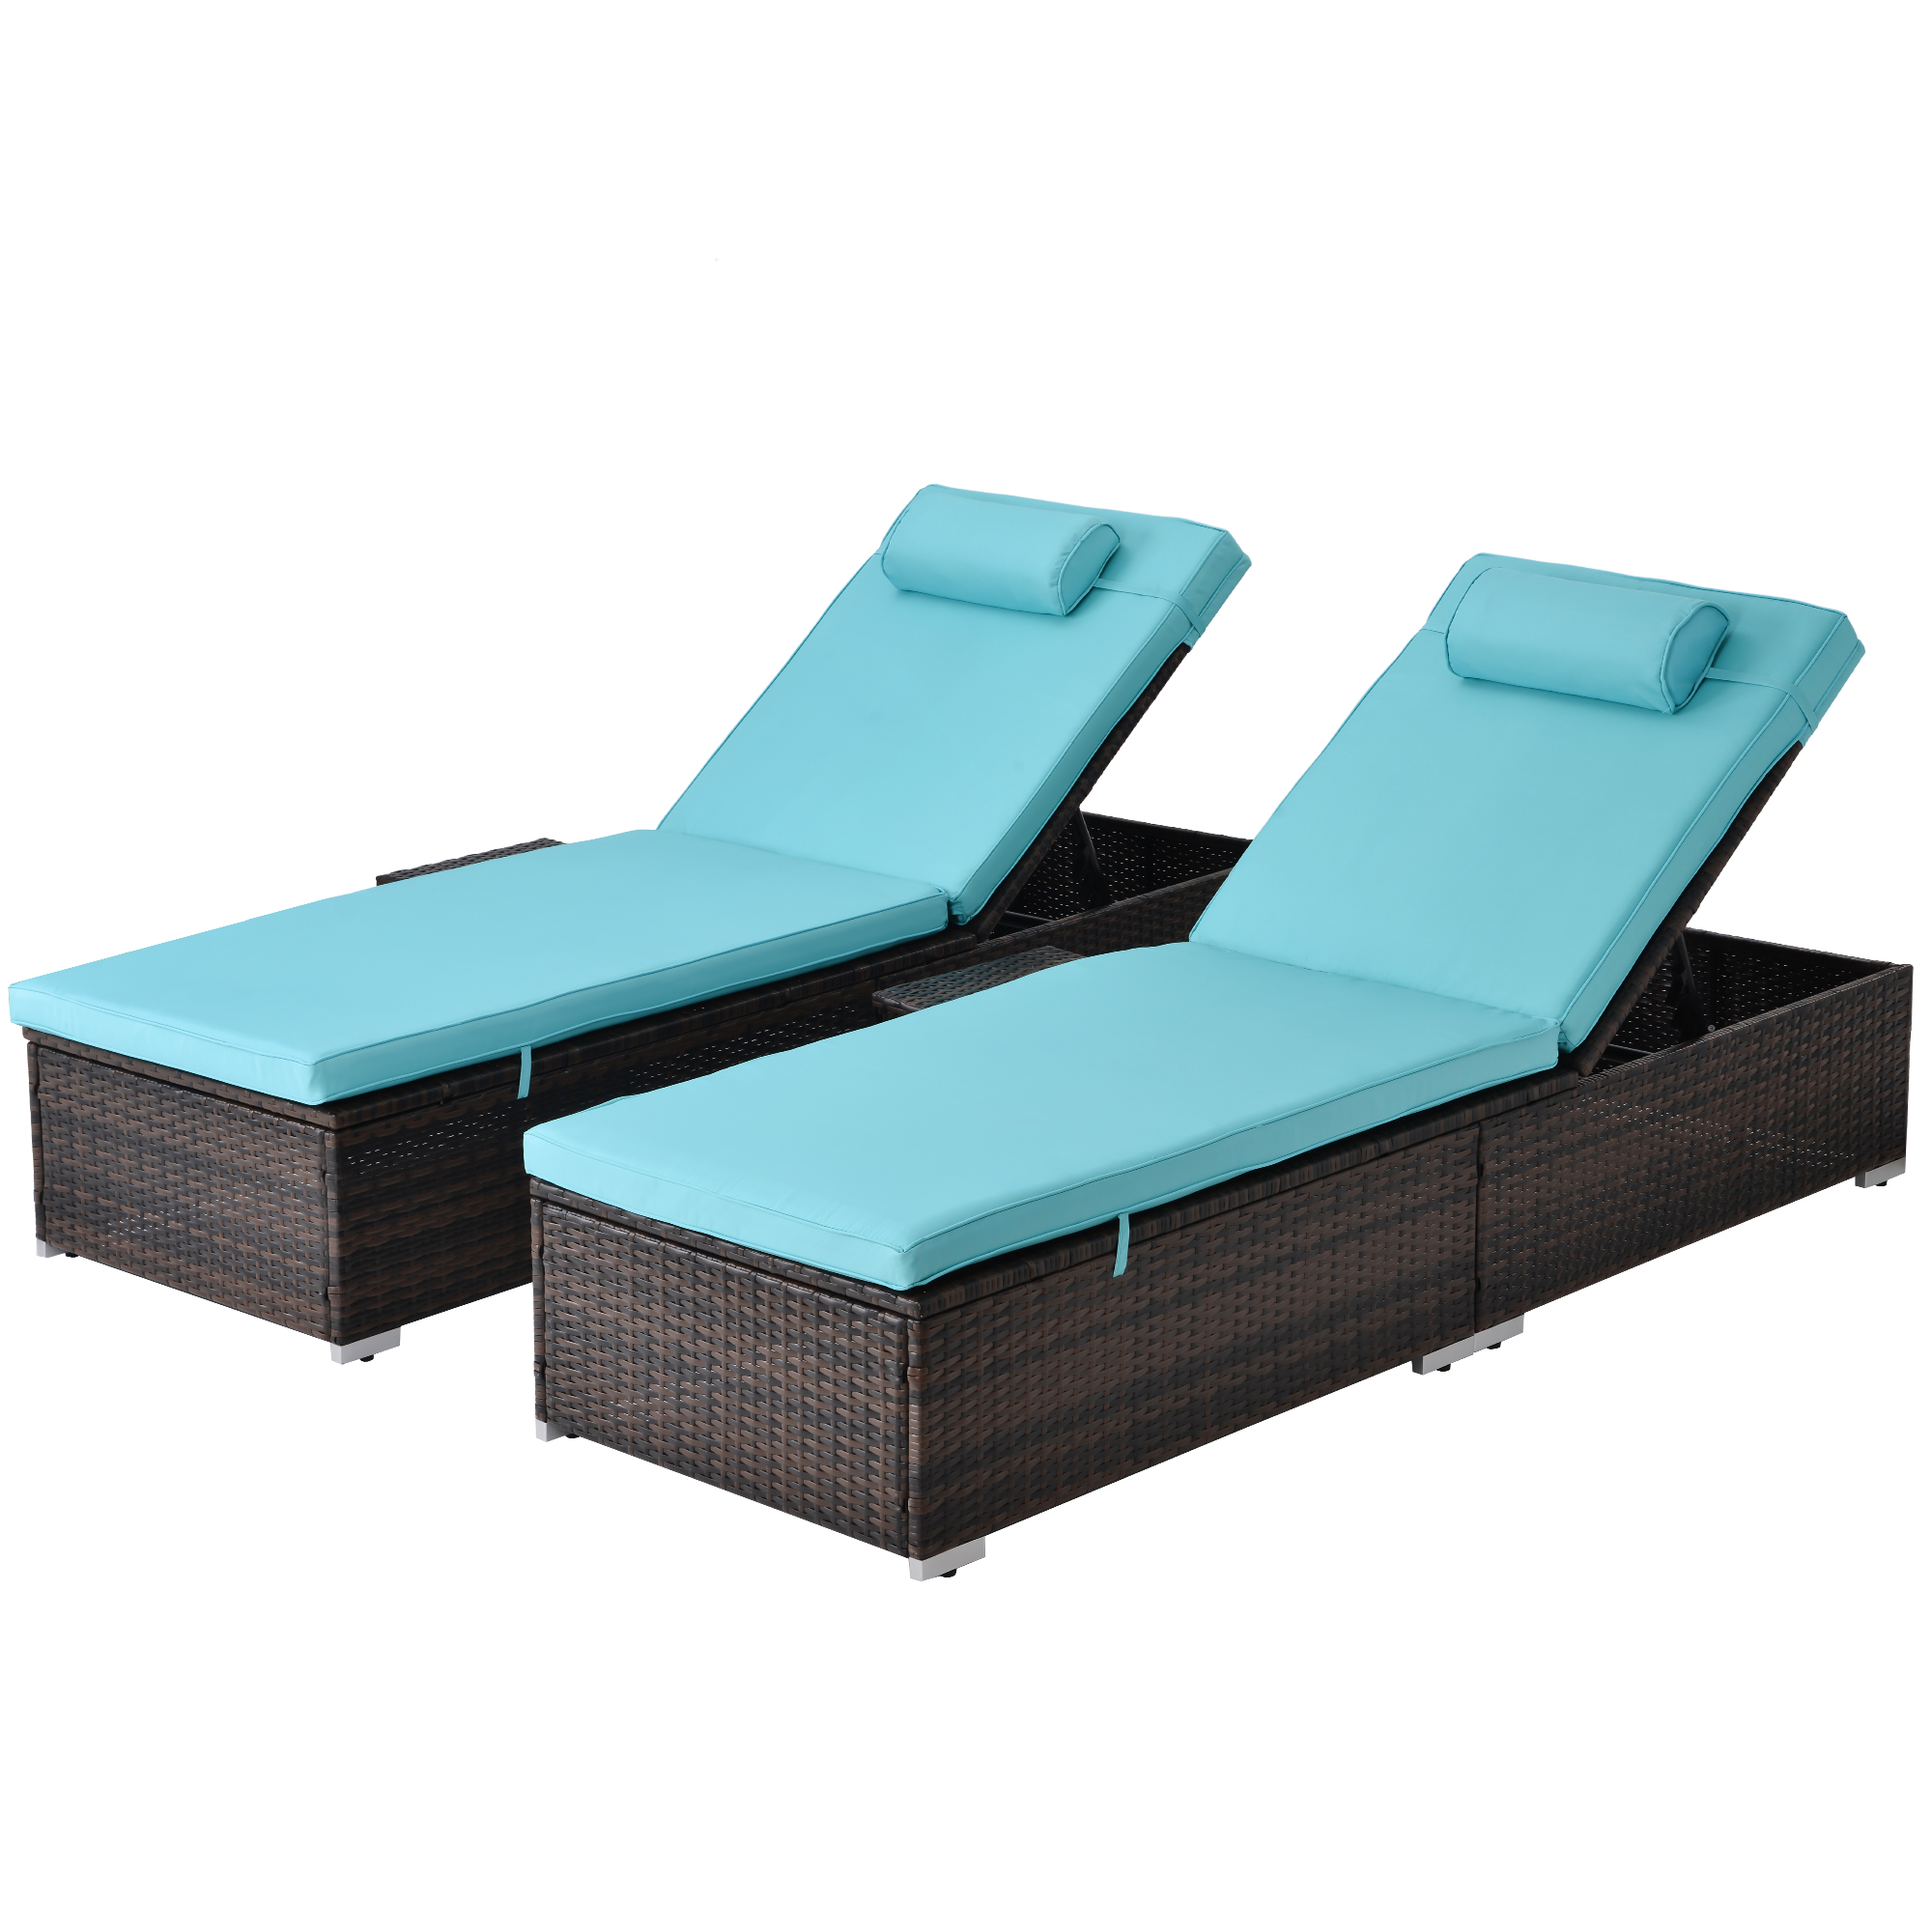 Set of 2 Rattan Chaise Lounge Chairs with Side Table, Outdoor Reclining Chairs Set W/Adjustable Backrest, Cushions and Head Pillow, Chaise Lounge Furniture Set for Poolside Beach Garden Patio, B19 - image 3 of 11